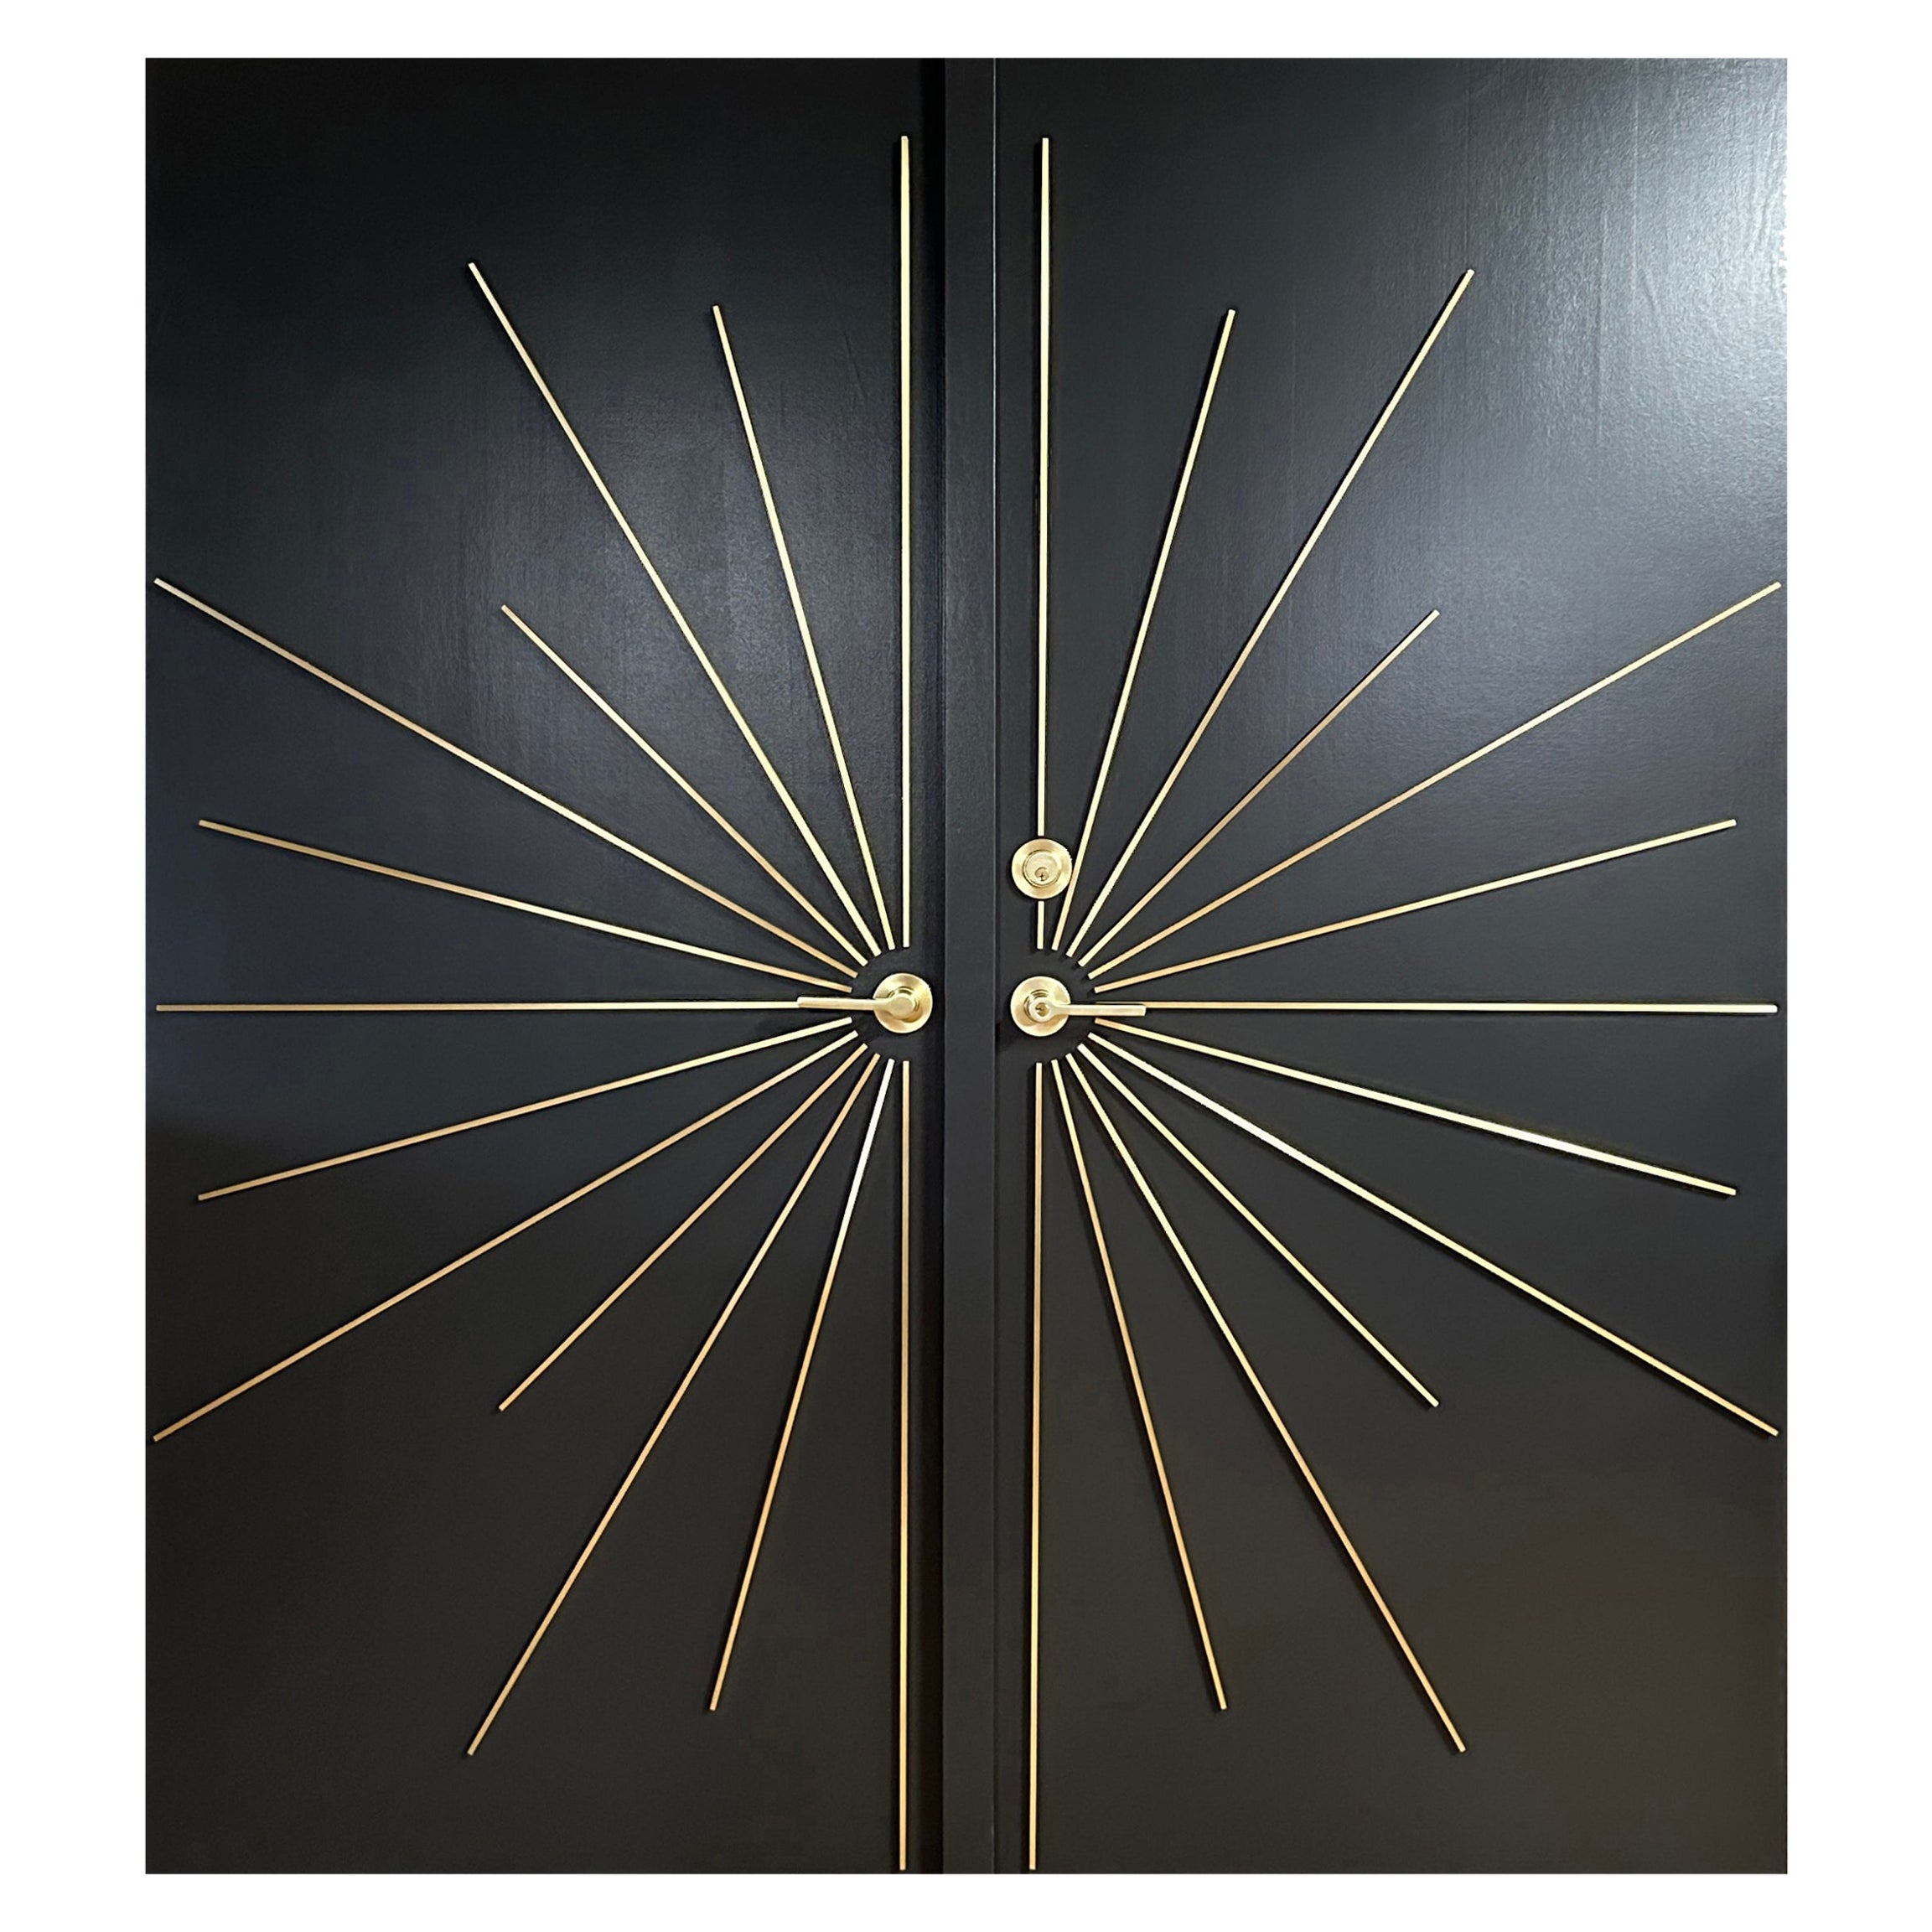 Modernist Black Double Entry Door Built to Specifications